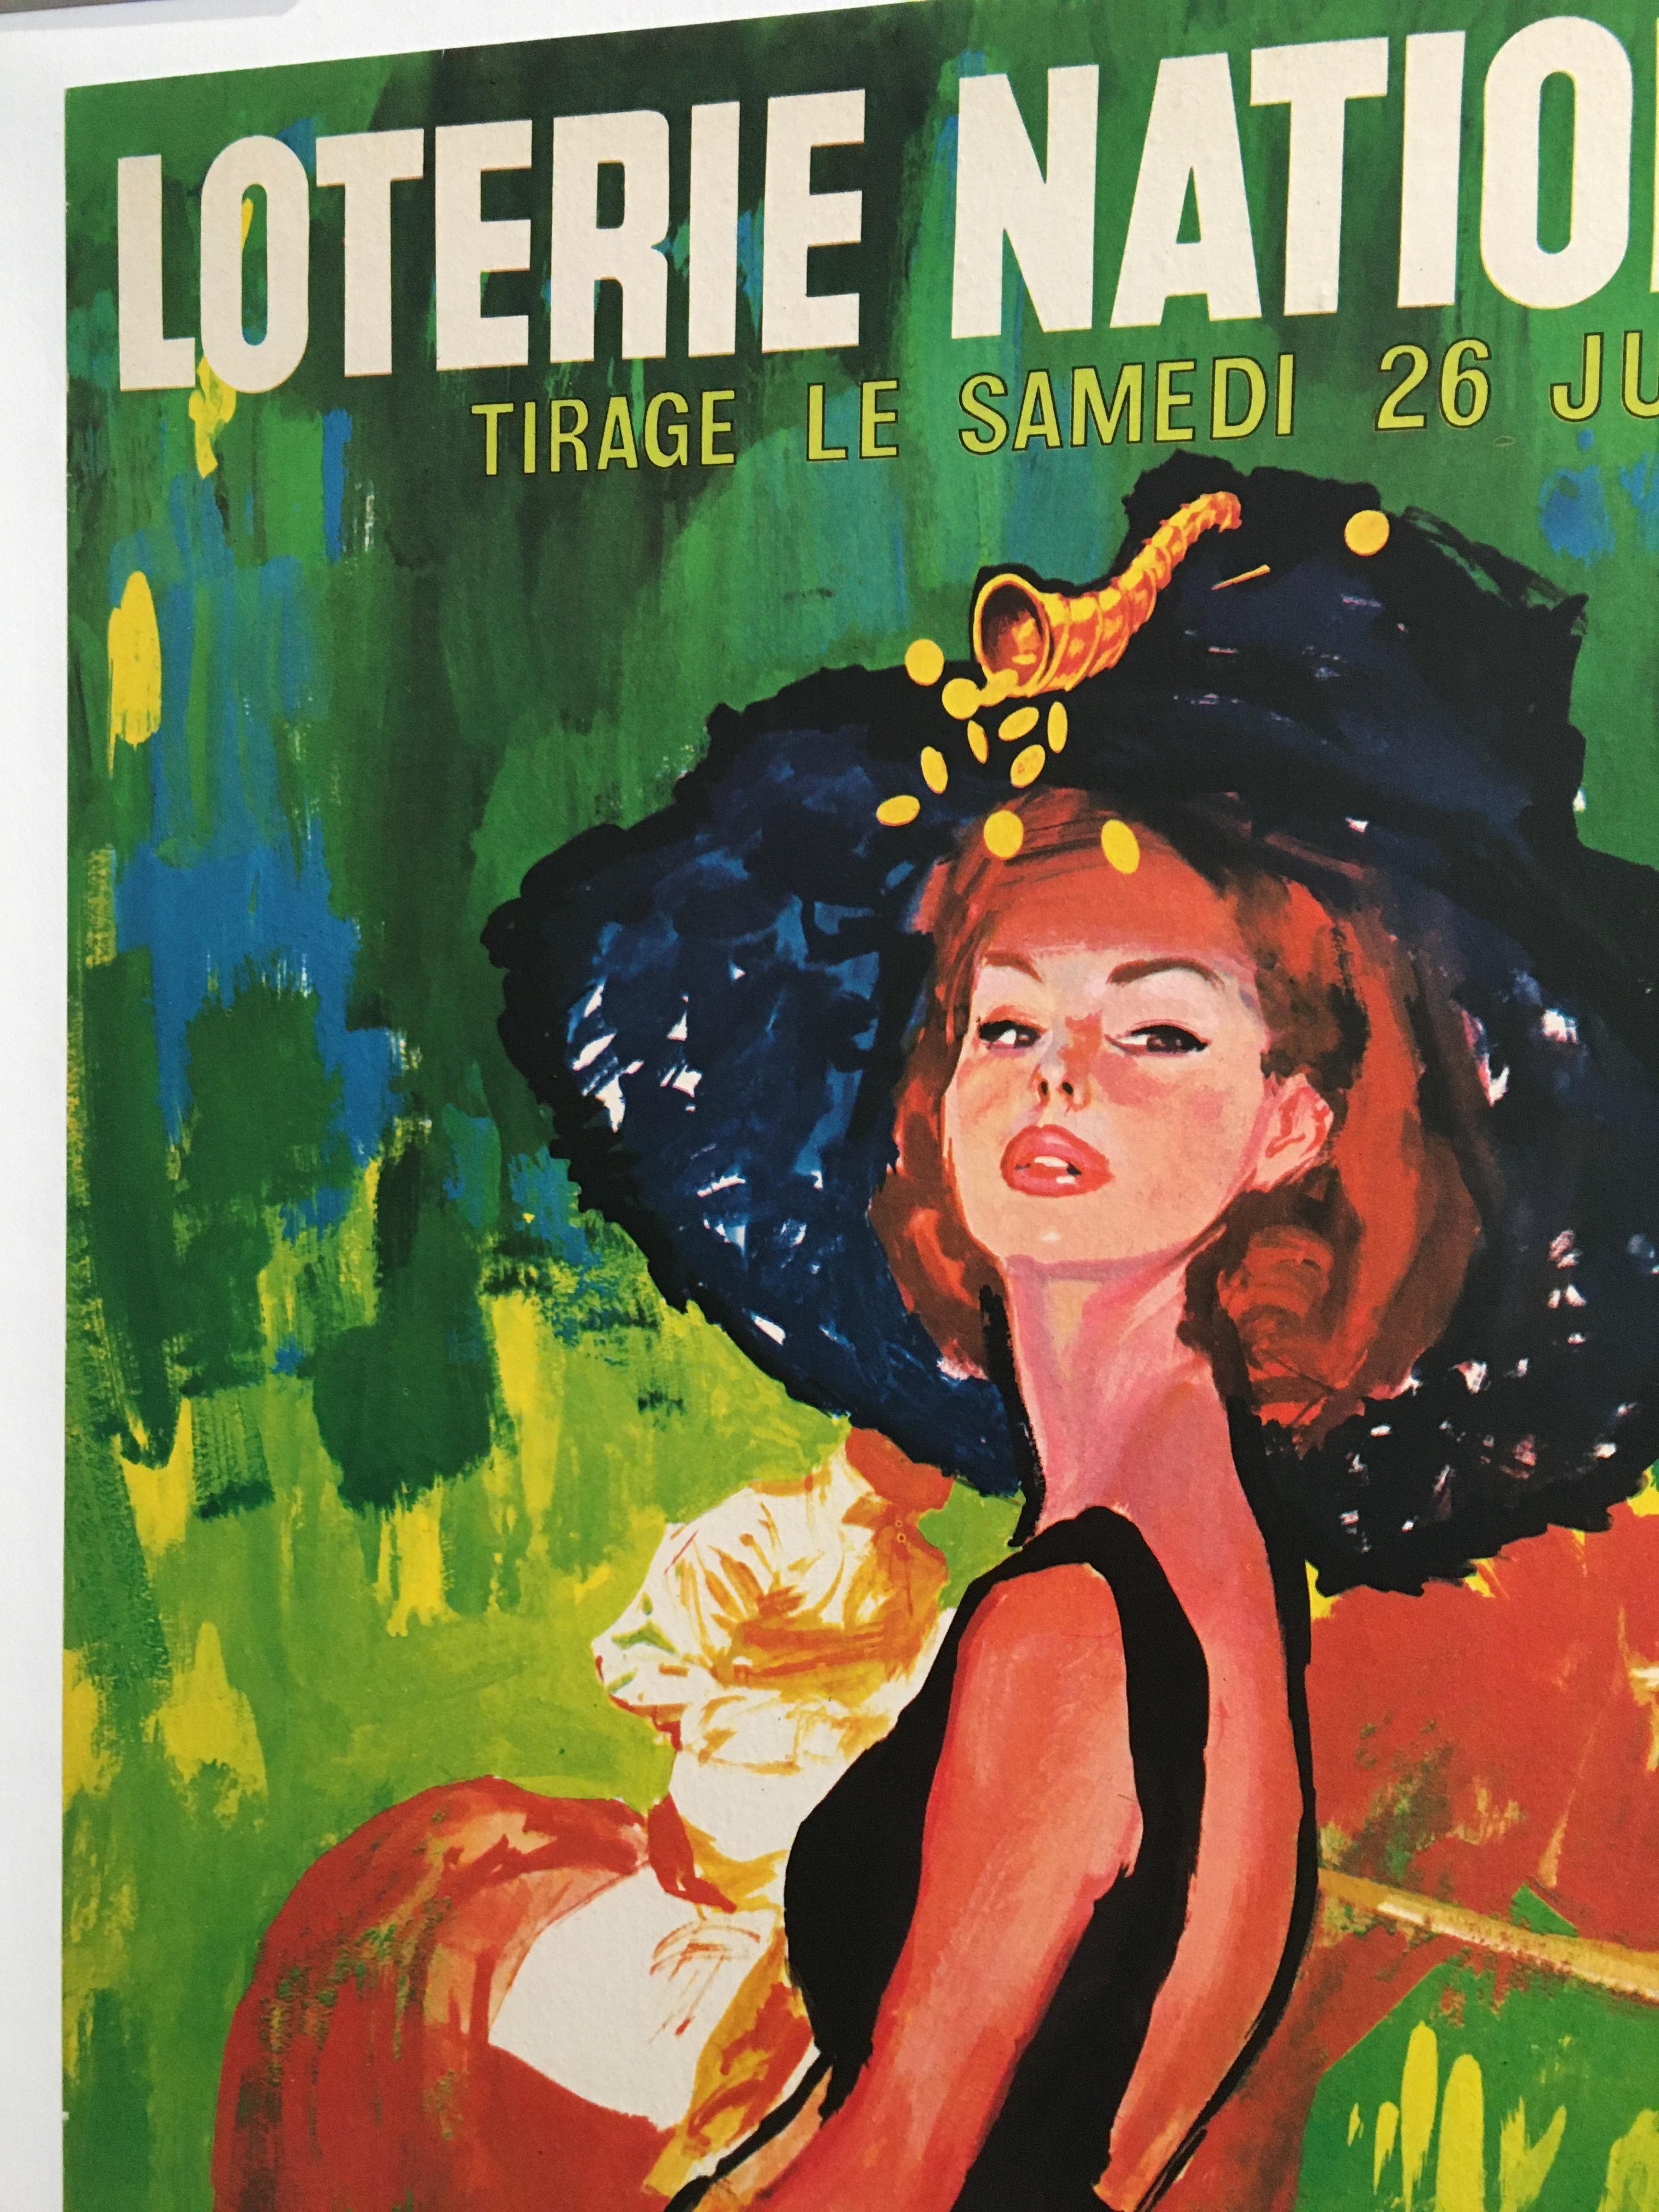 'Loterie Nationale' Original Vintage French Lithograph Poster, by Brenot, 1965 In Excellent Condition For Sale In Melbourne, Victoria